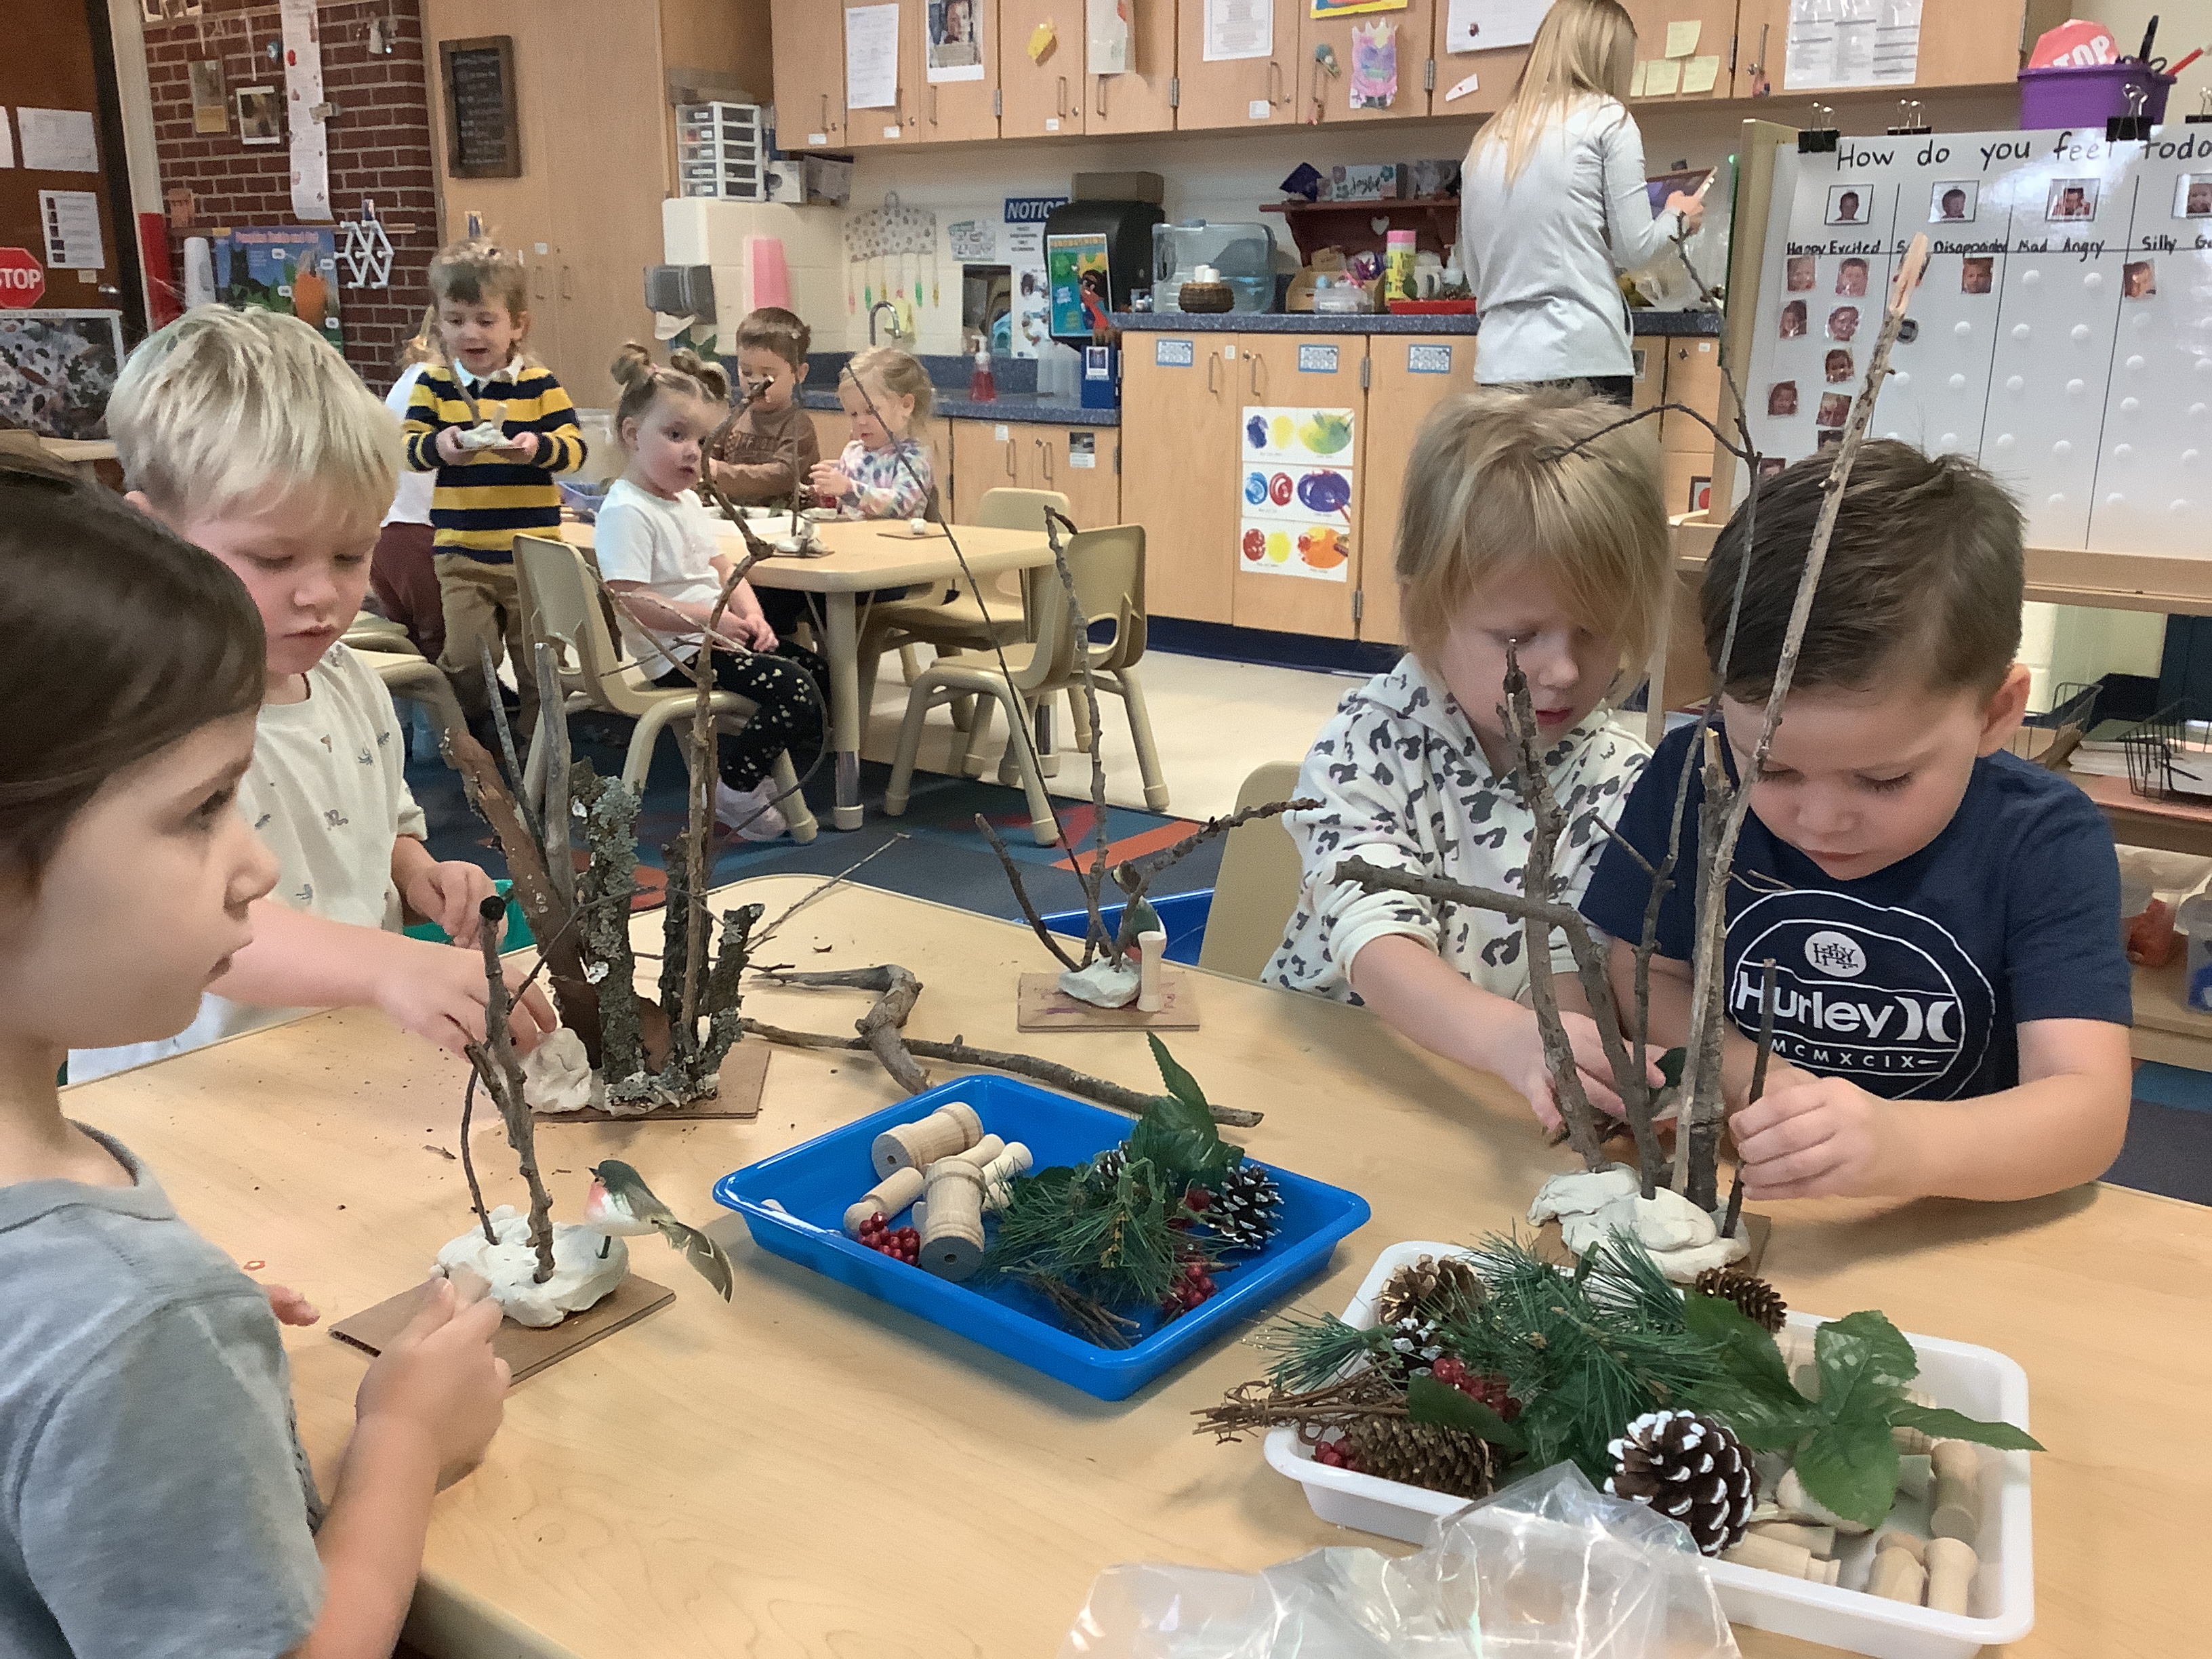 Building our own trees with clay and sticks